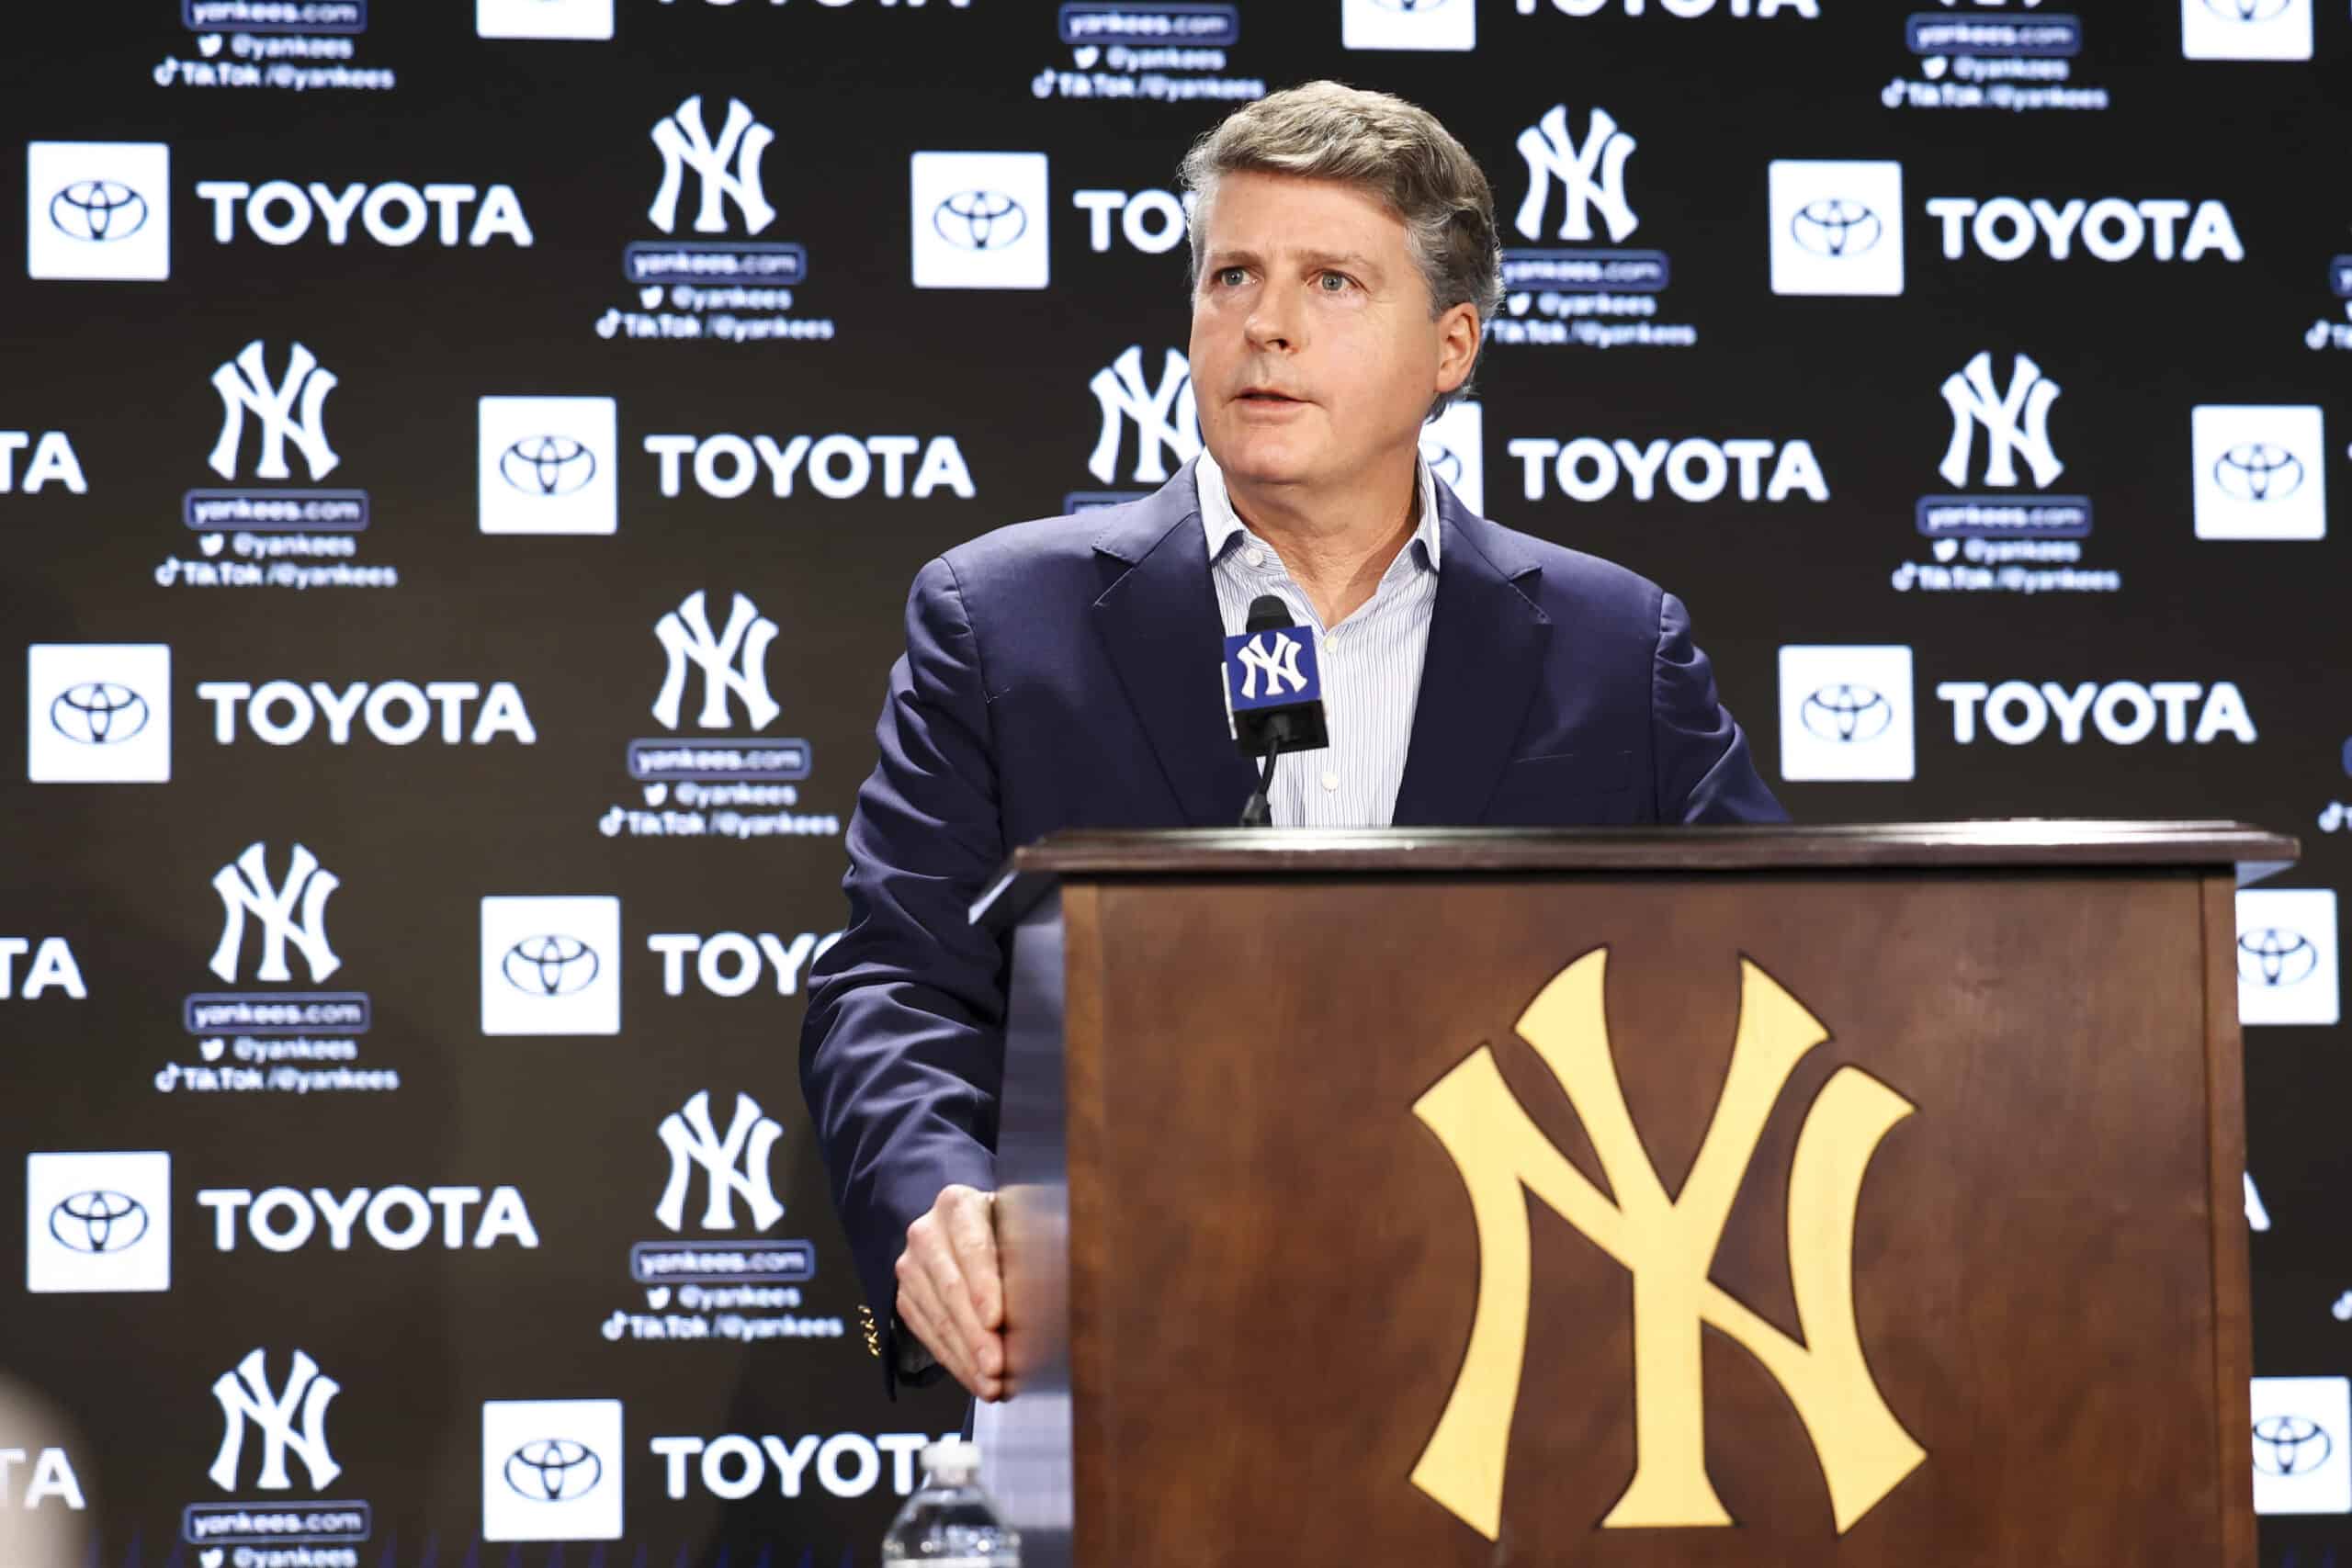 The Yankees owner thinks a salary floor is needed to fix MLB's payroll disparity.